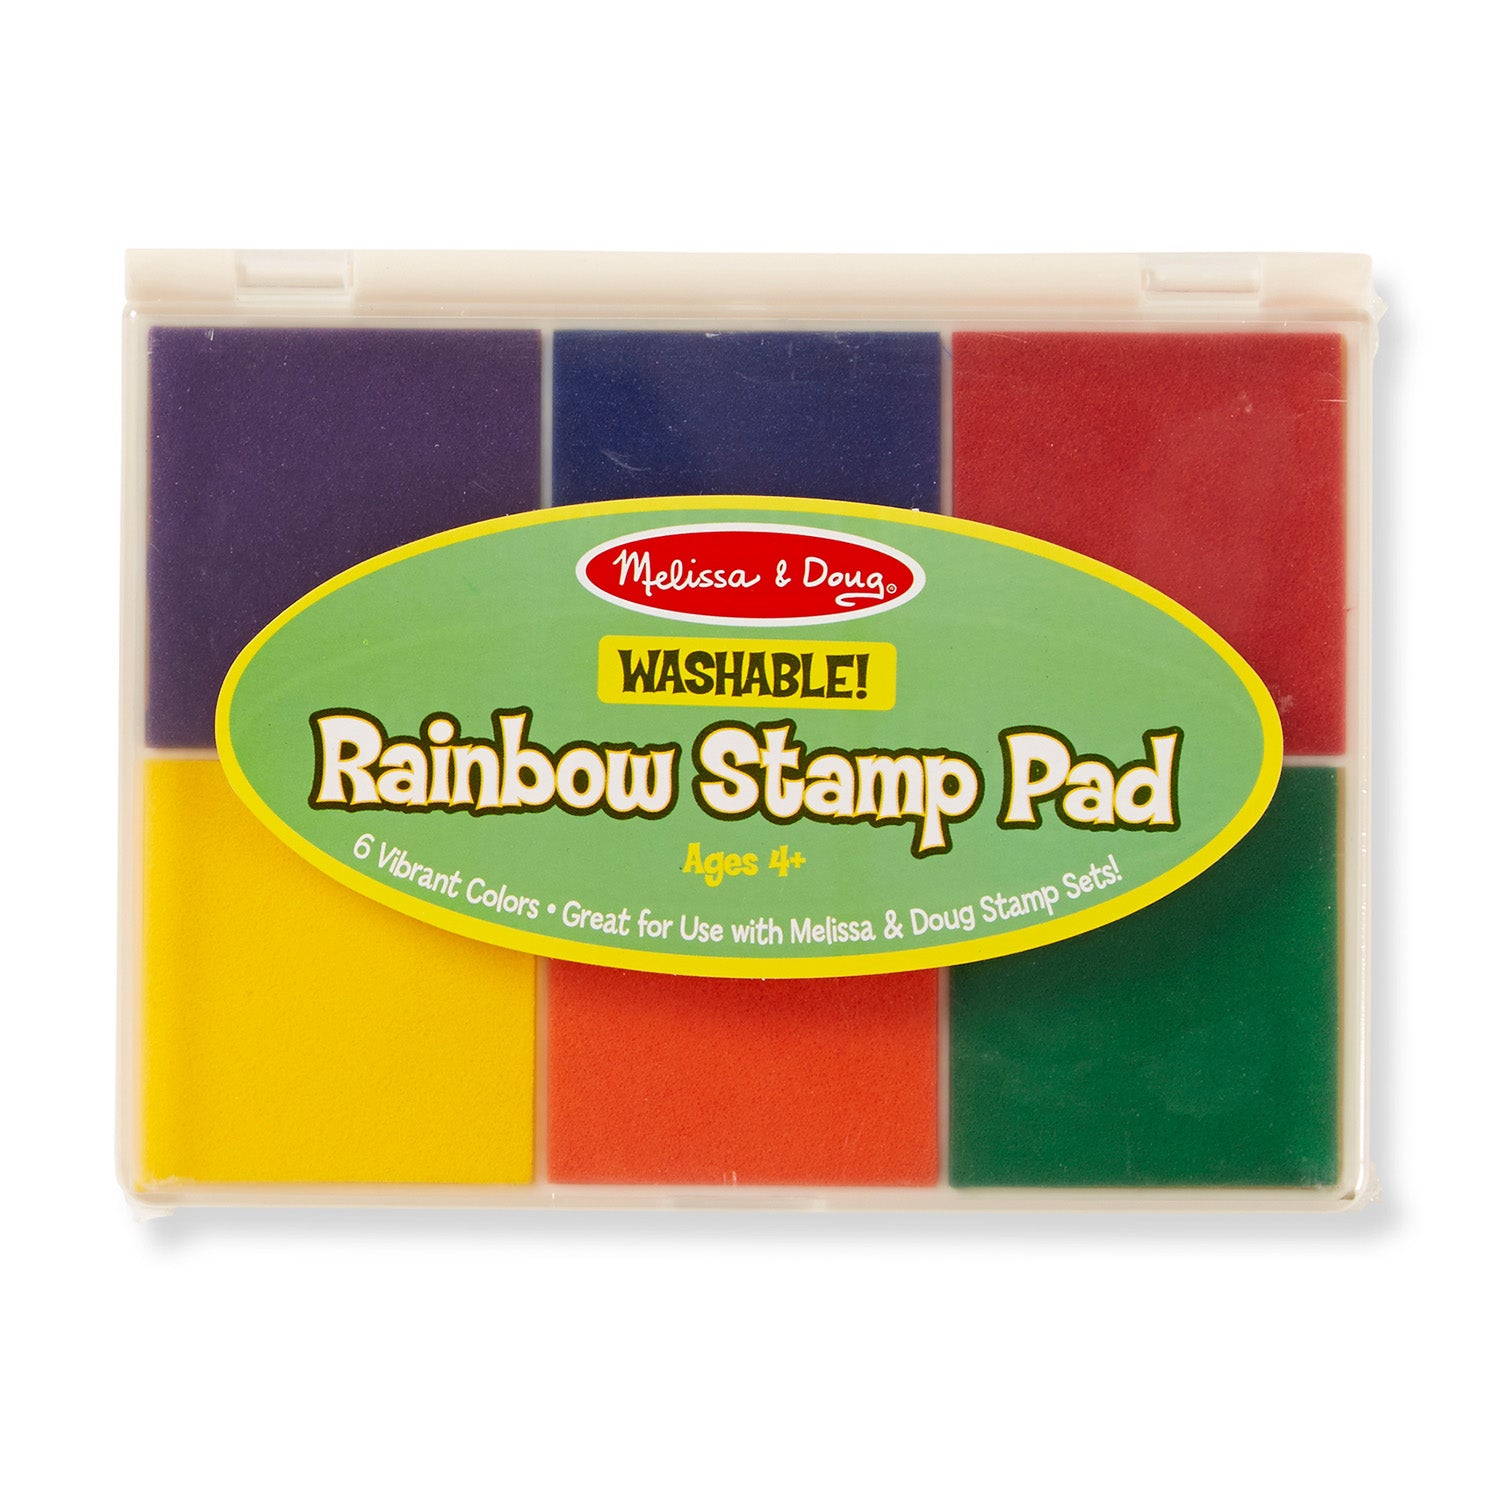  Stamp Ink Pads for Rubber Stamps, Stamp Pads for Card Making  Wood Fabric and Paper(Pine Green) : Arts, Crafts & Sewing